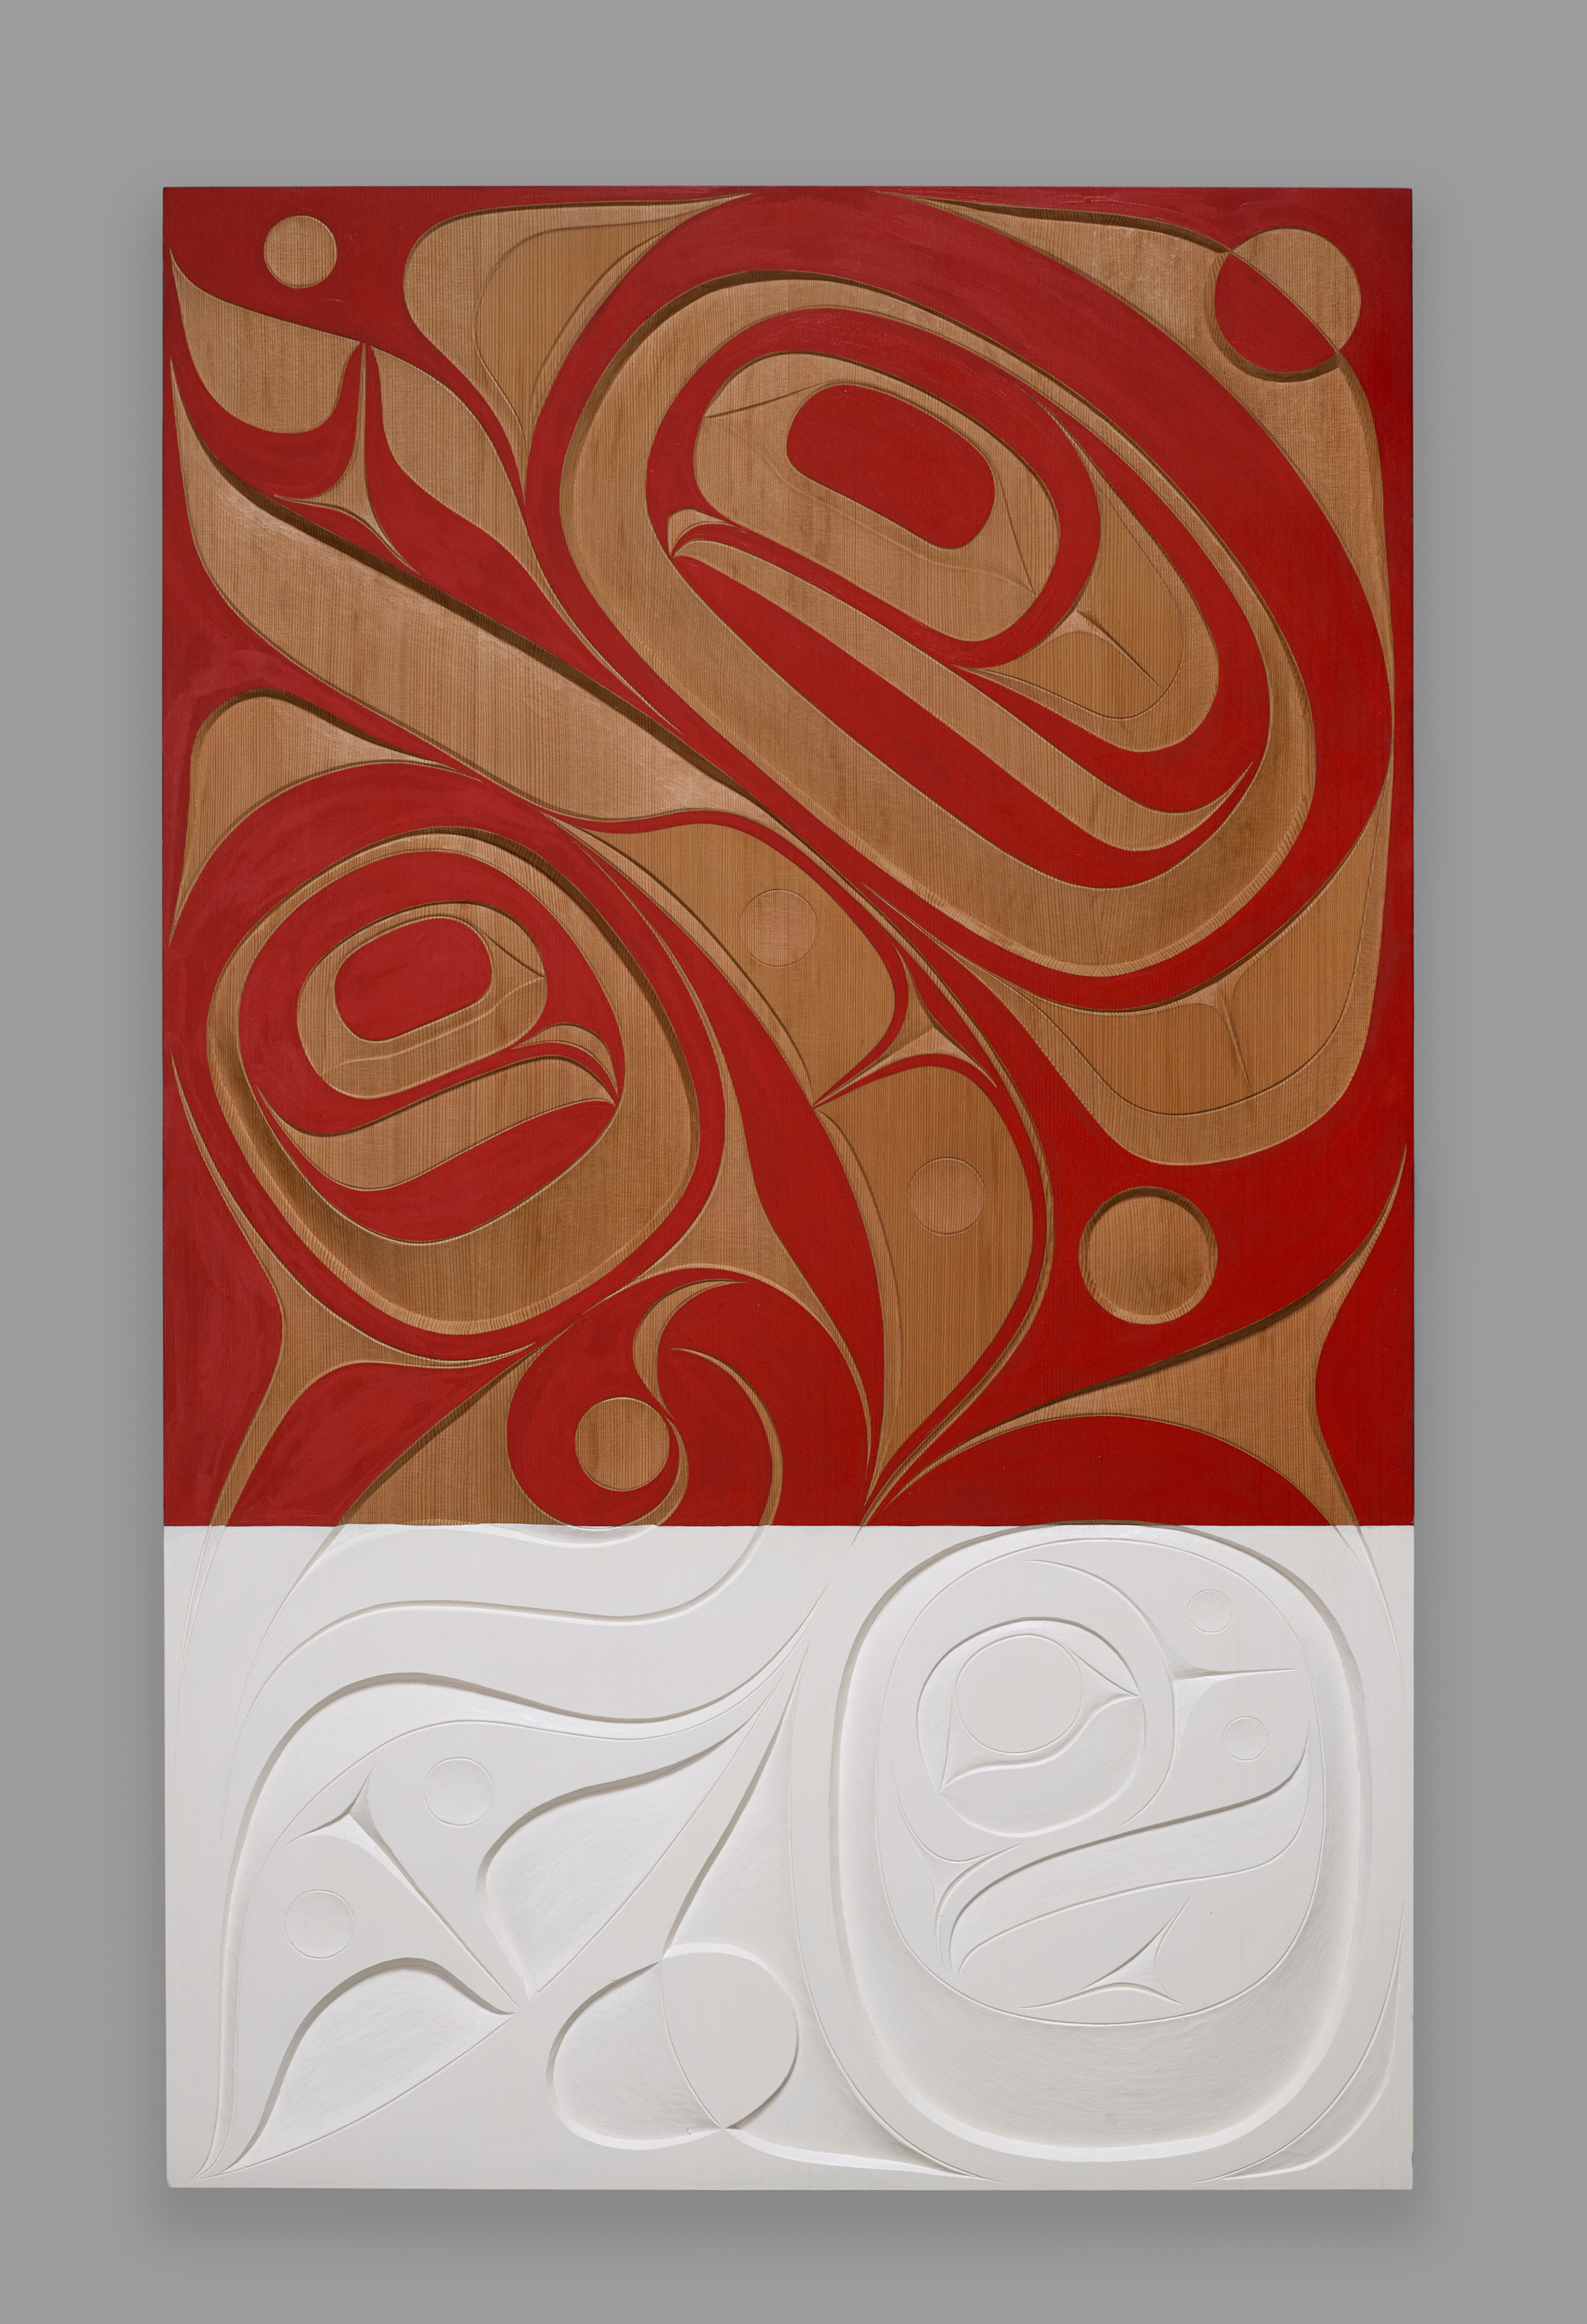 Rande Cook, Kwakwaka’wakw, born 1977: Our Home, 2018. Red cedar and acrylic. Museum purchase, Fowler McCormick, Class of 1921, Fund (2019-23). © Rande Cook